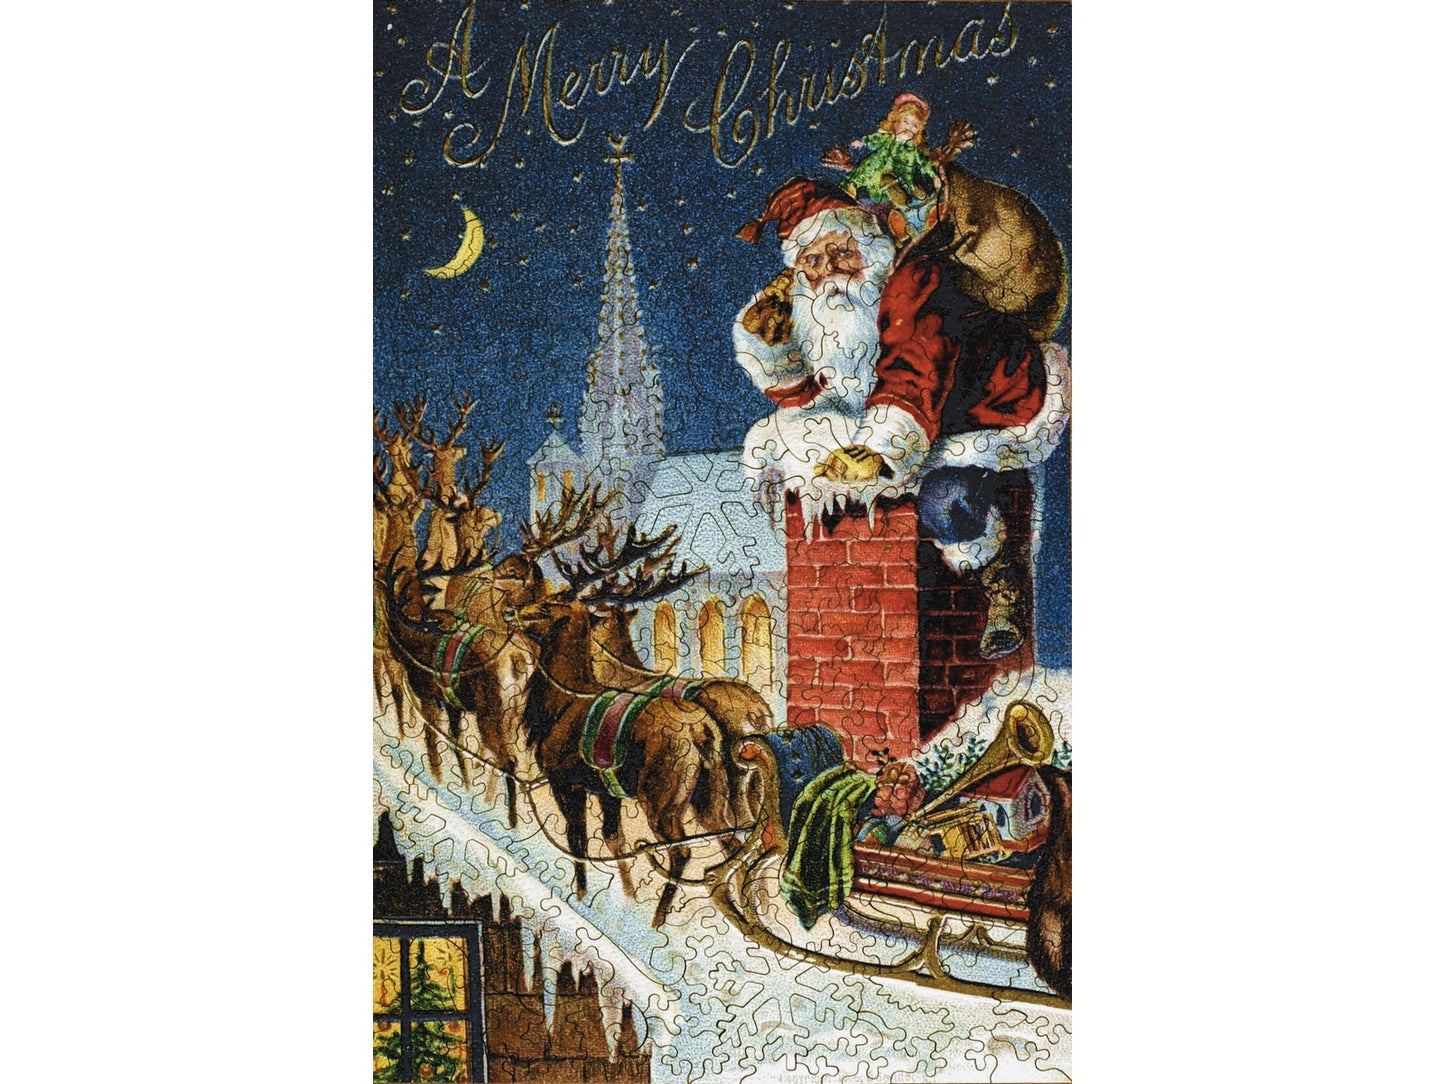 The front of the puzzle, Rooftop Reindeer, showing Santa Claus climbing into a chimney, next to his sleigh and reindeer.